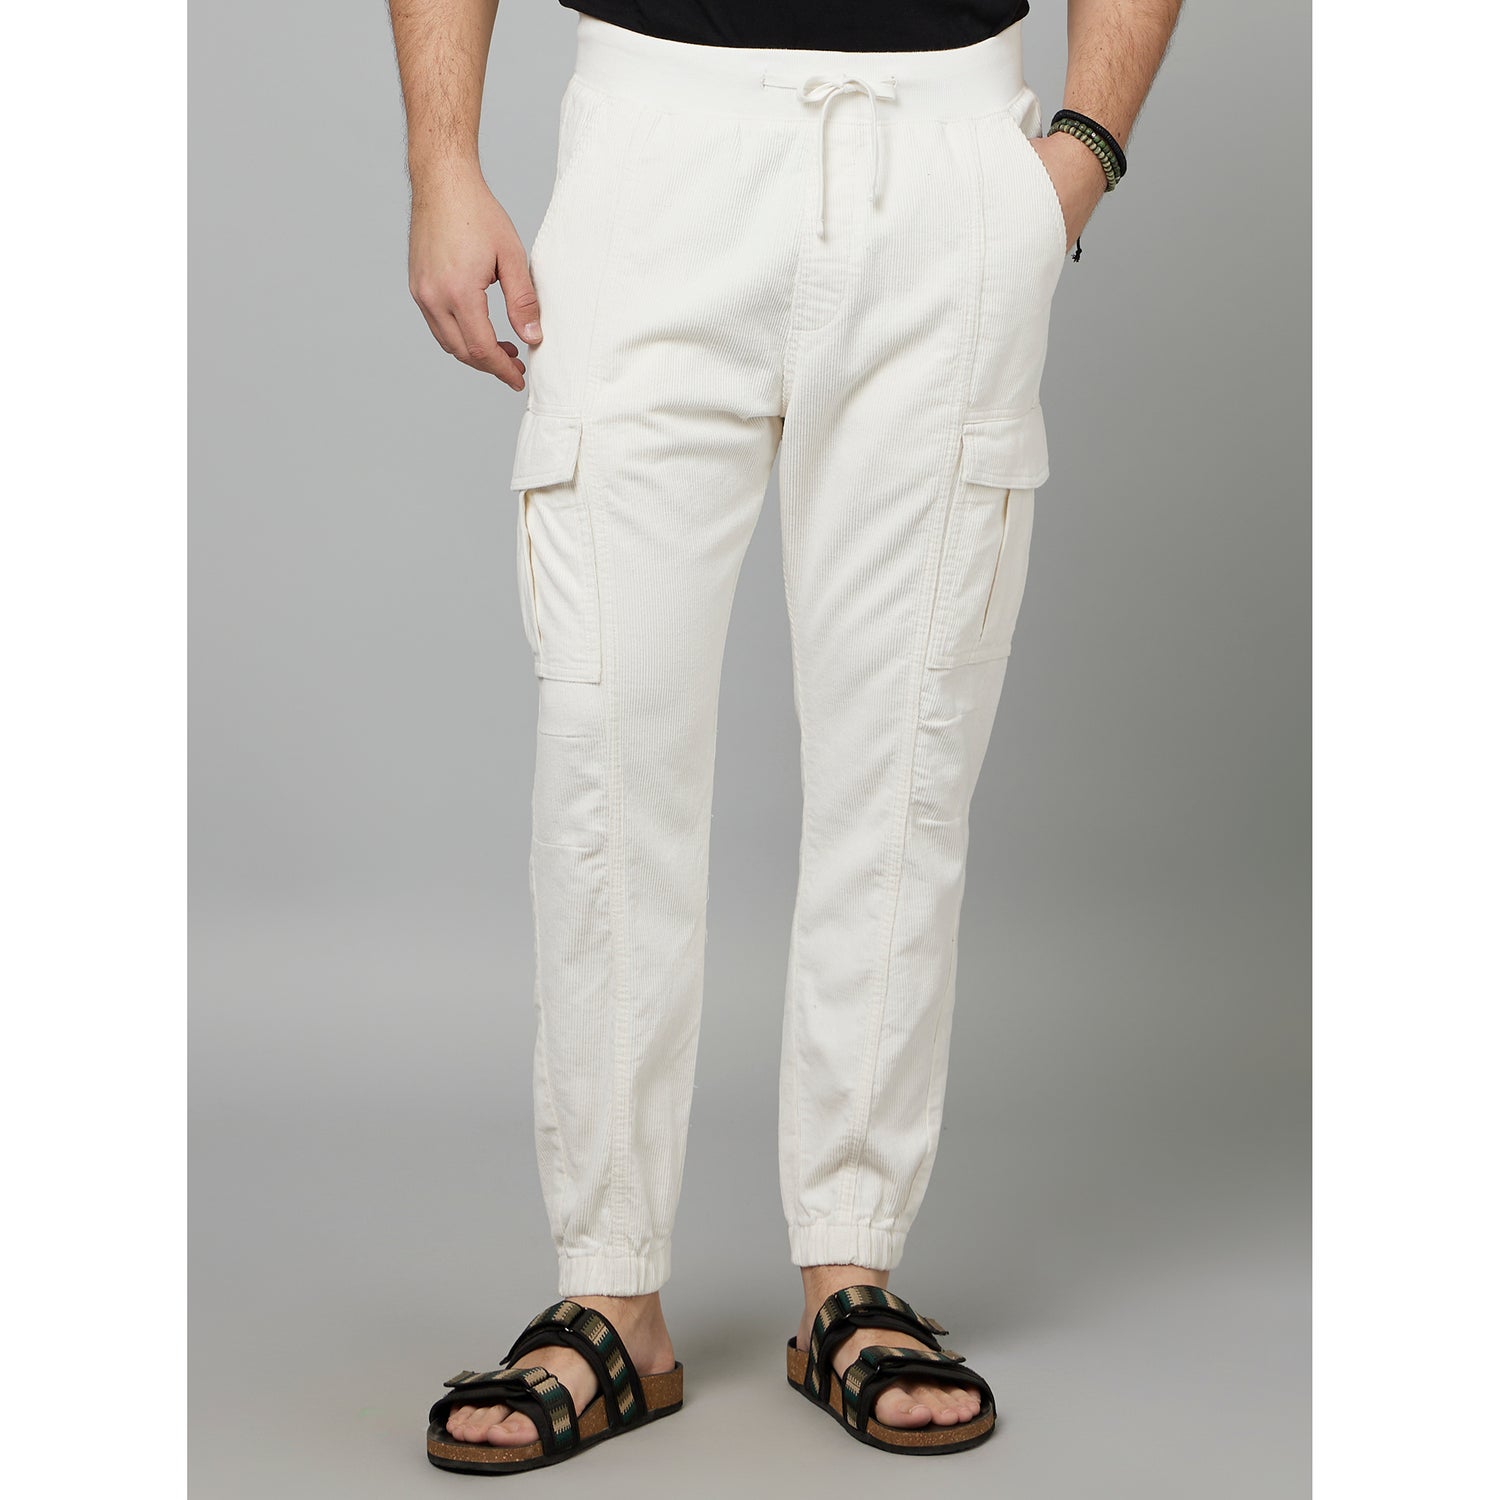 Off White Mid-Rise Cotton Joggers (FOKORD)